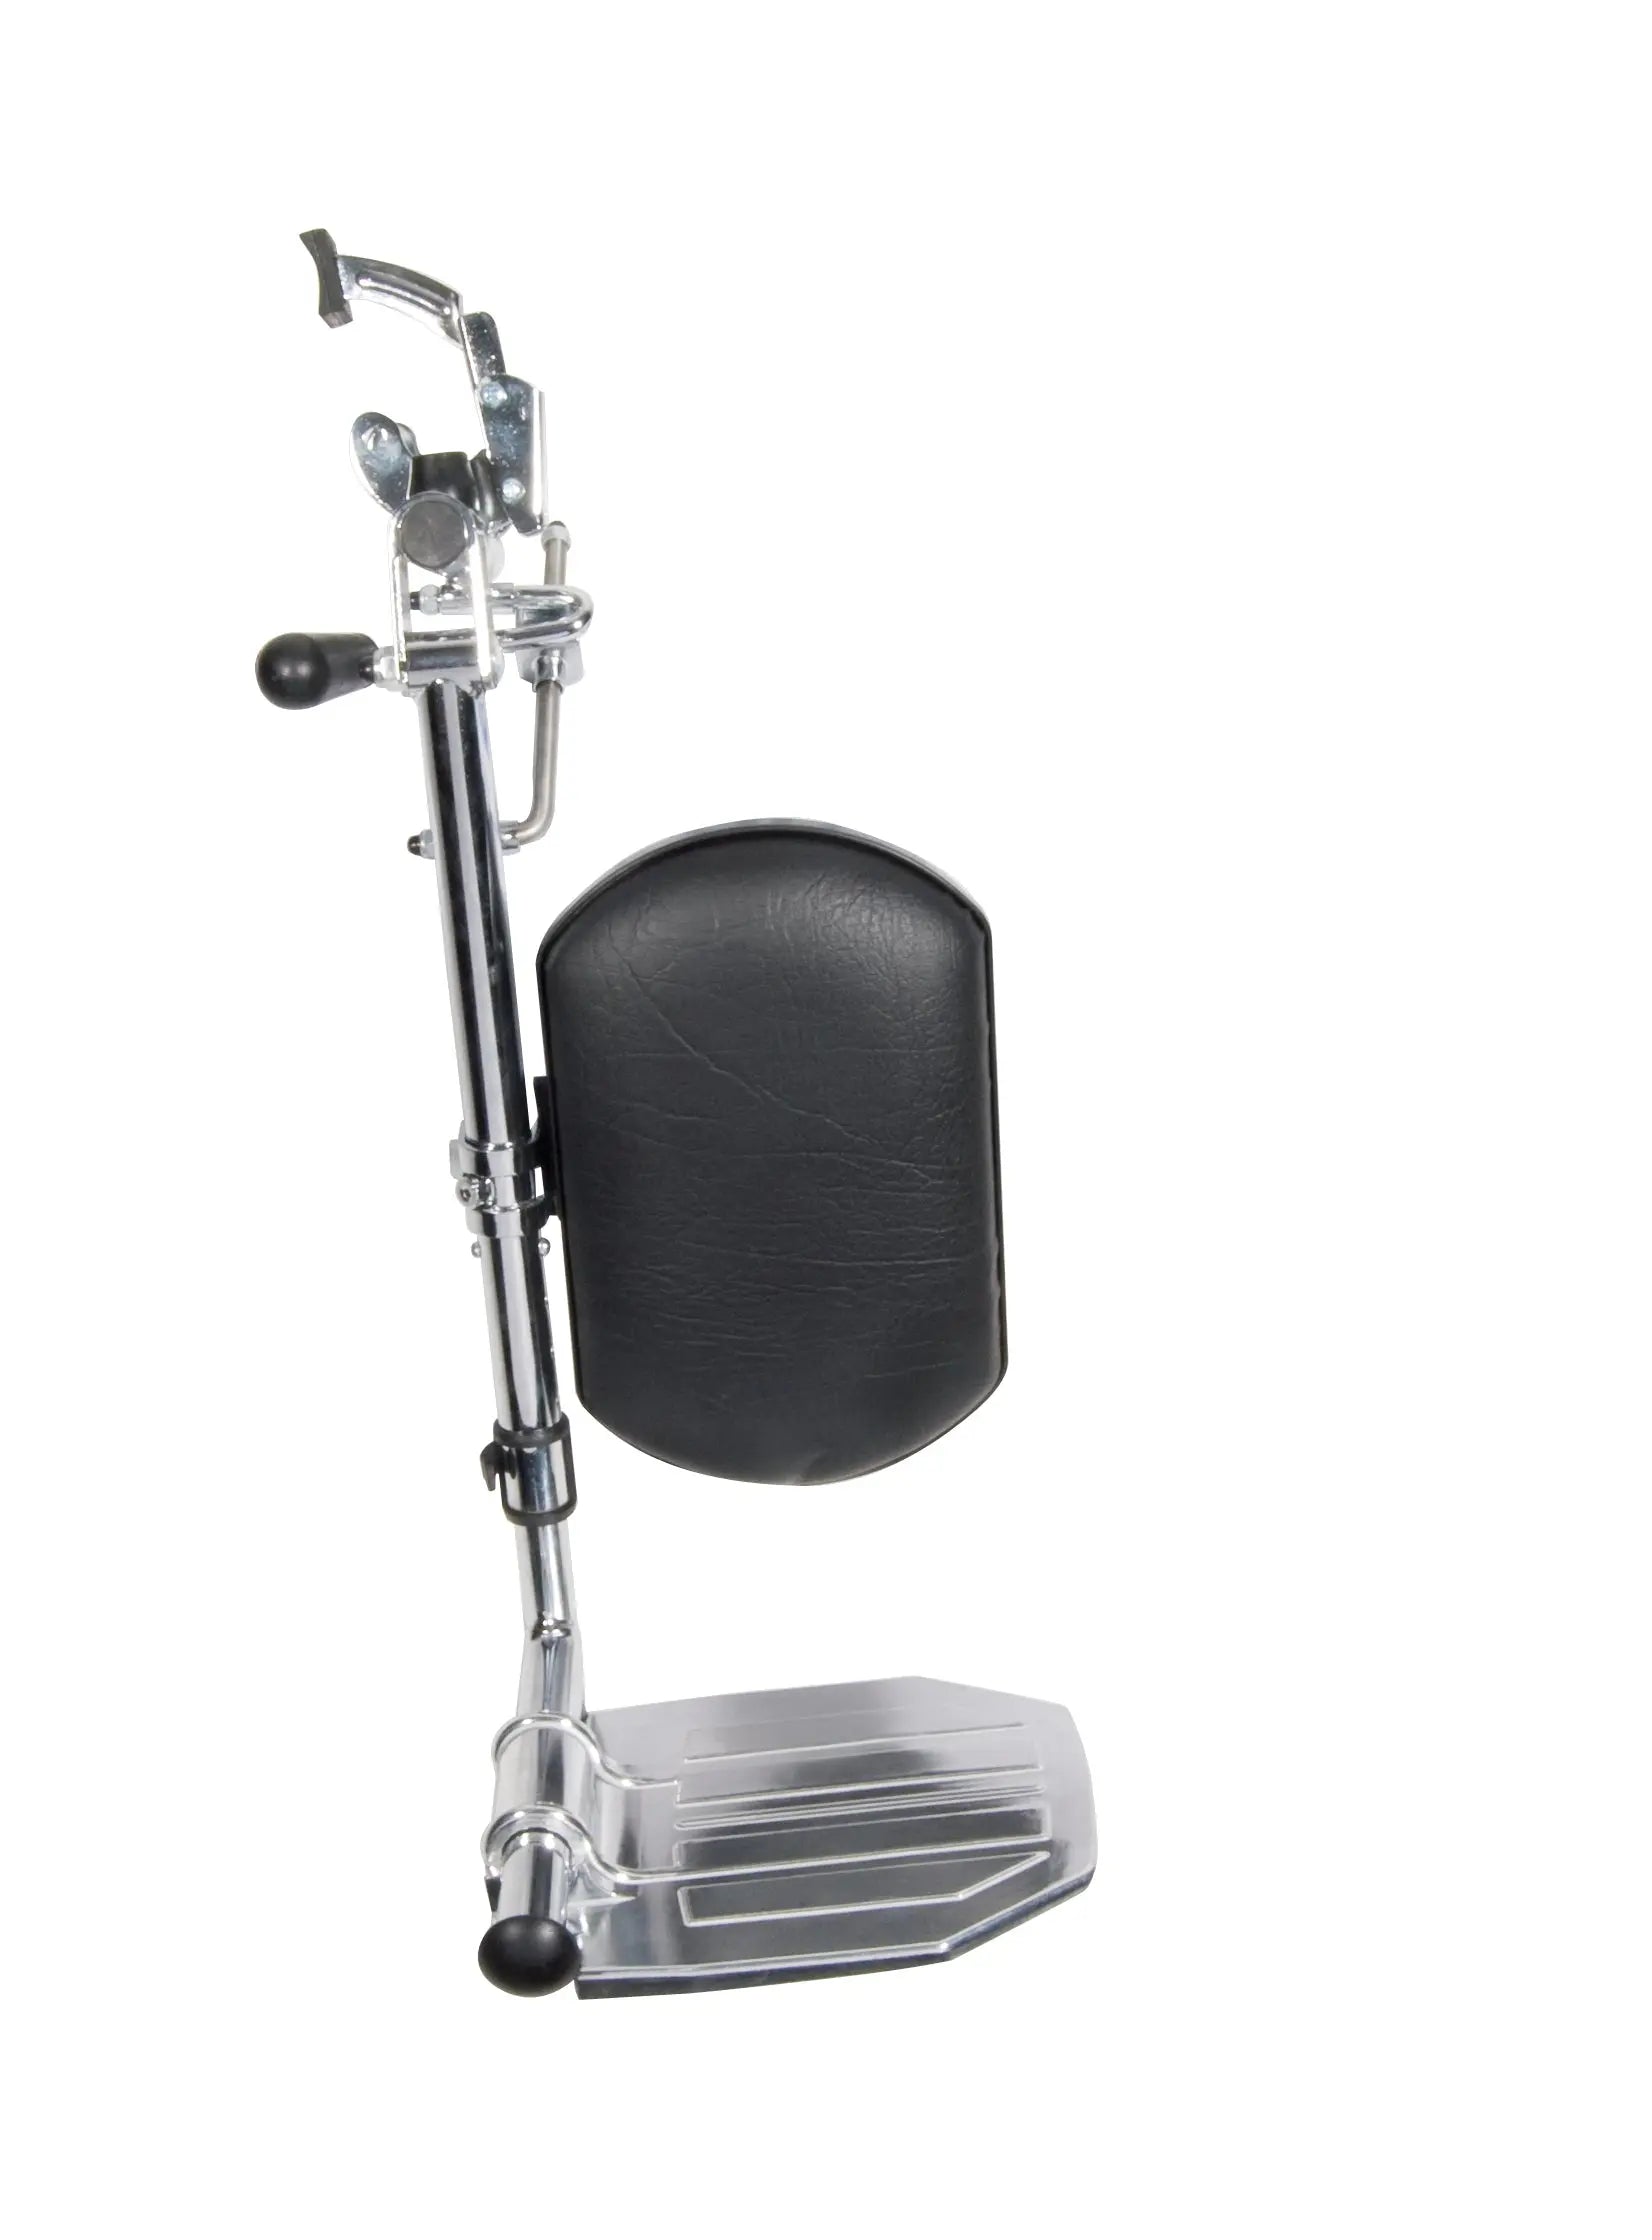 Elevating Legrests for Bariatric Sentra Wheelchairs - Home Health Store Inc